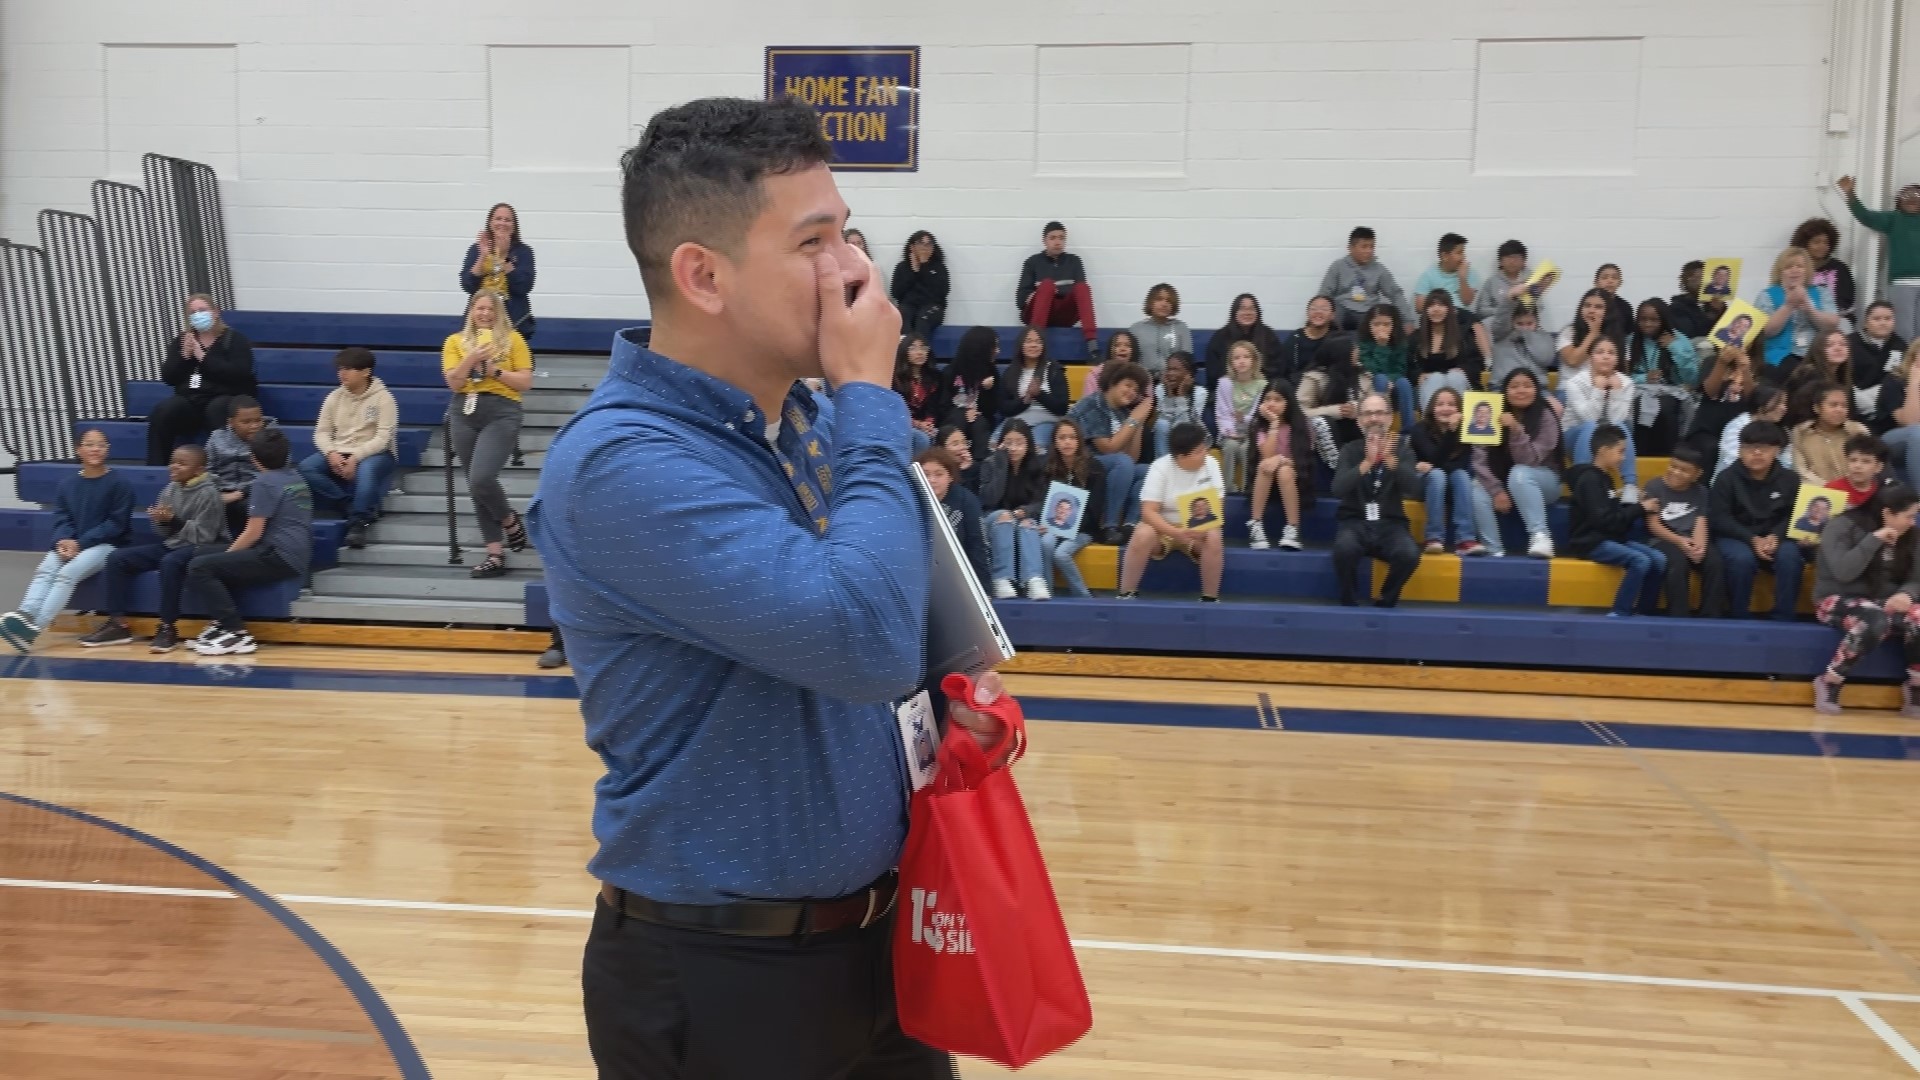 A truly moving assembly complete with banners, cheers and tears—it was all to surprise our latest Teacher of the Week, this time at Lee Middle School in Wyoming.